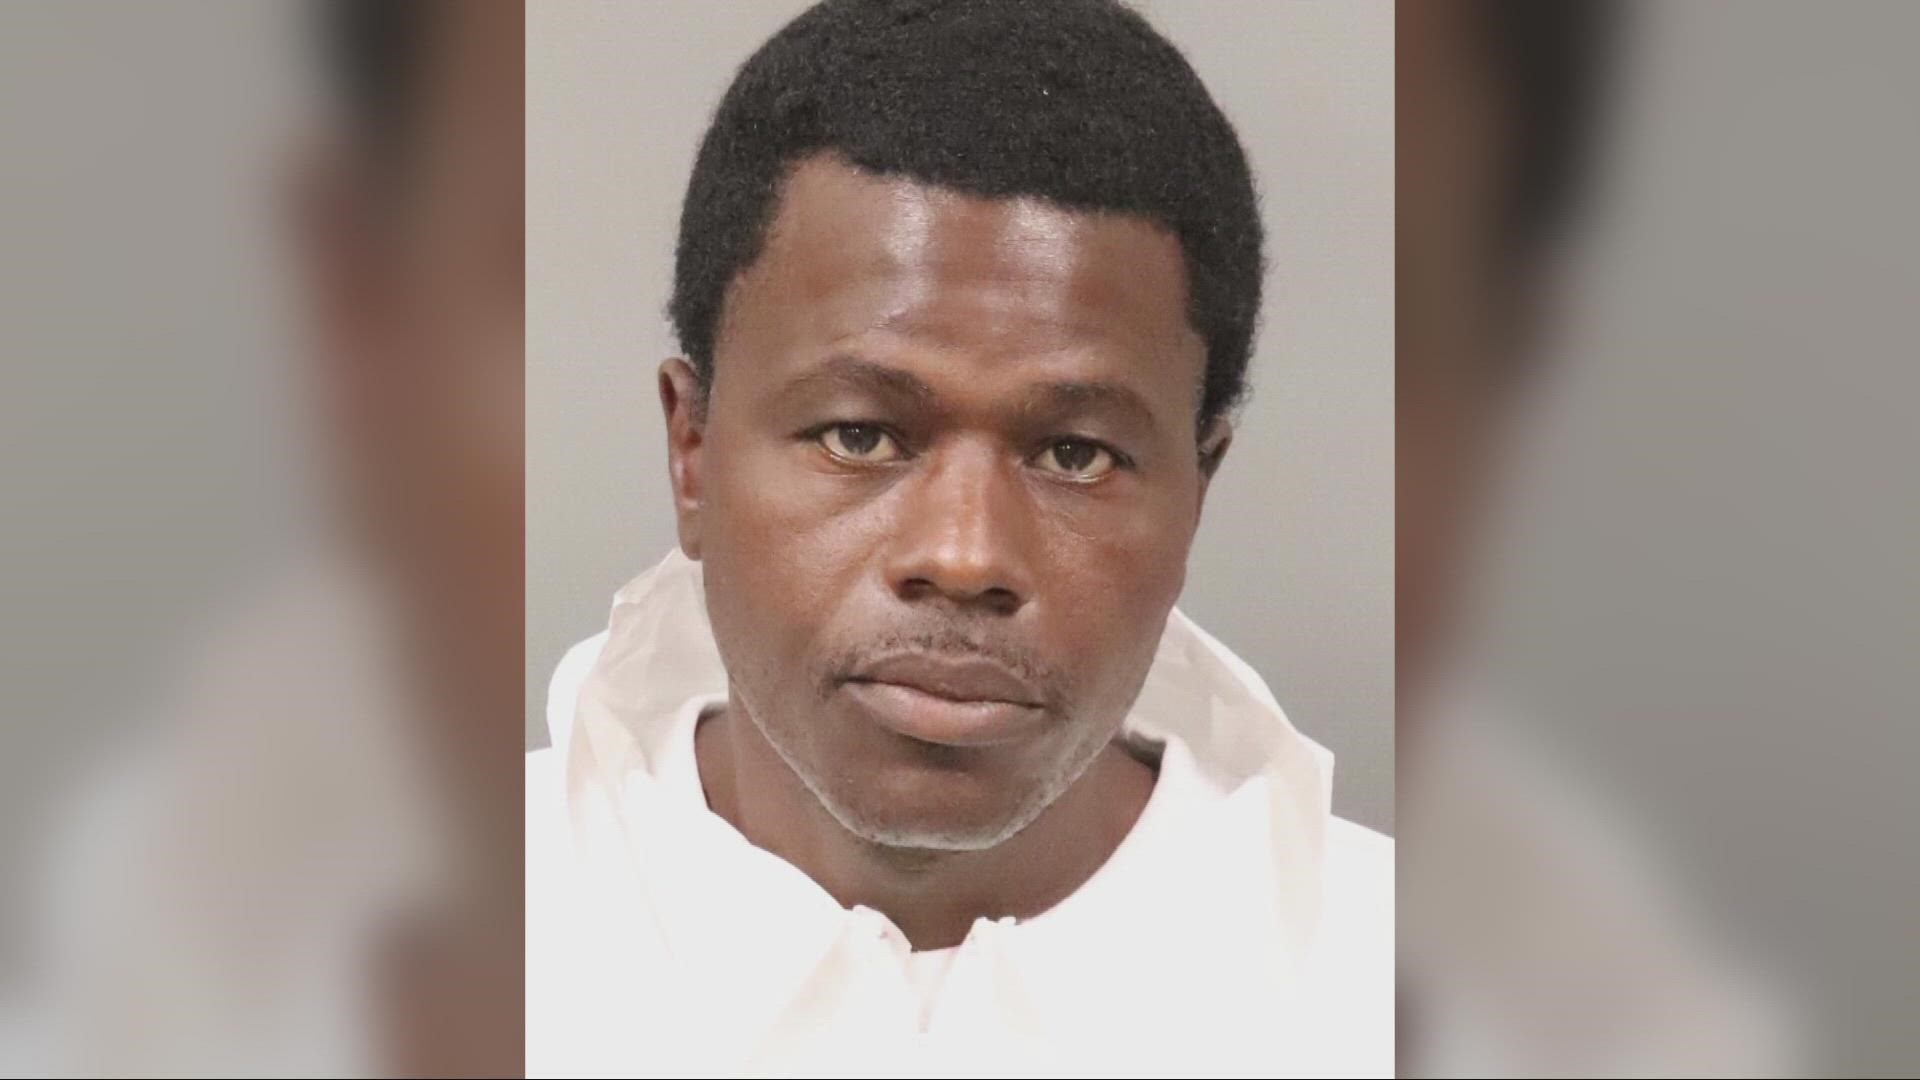 Wesley Brownlee was arrested in connection to the serial killings in Stockton. Police said he was arrested while on the hunt.